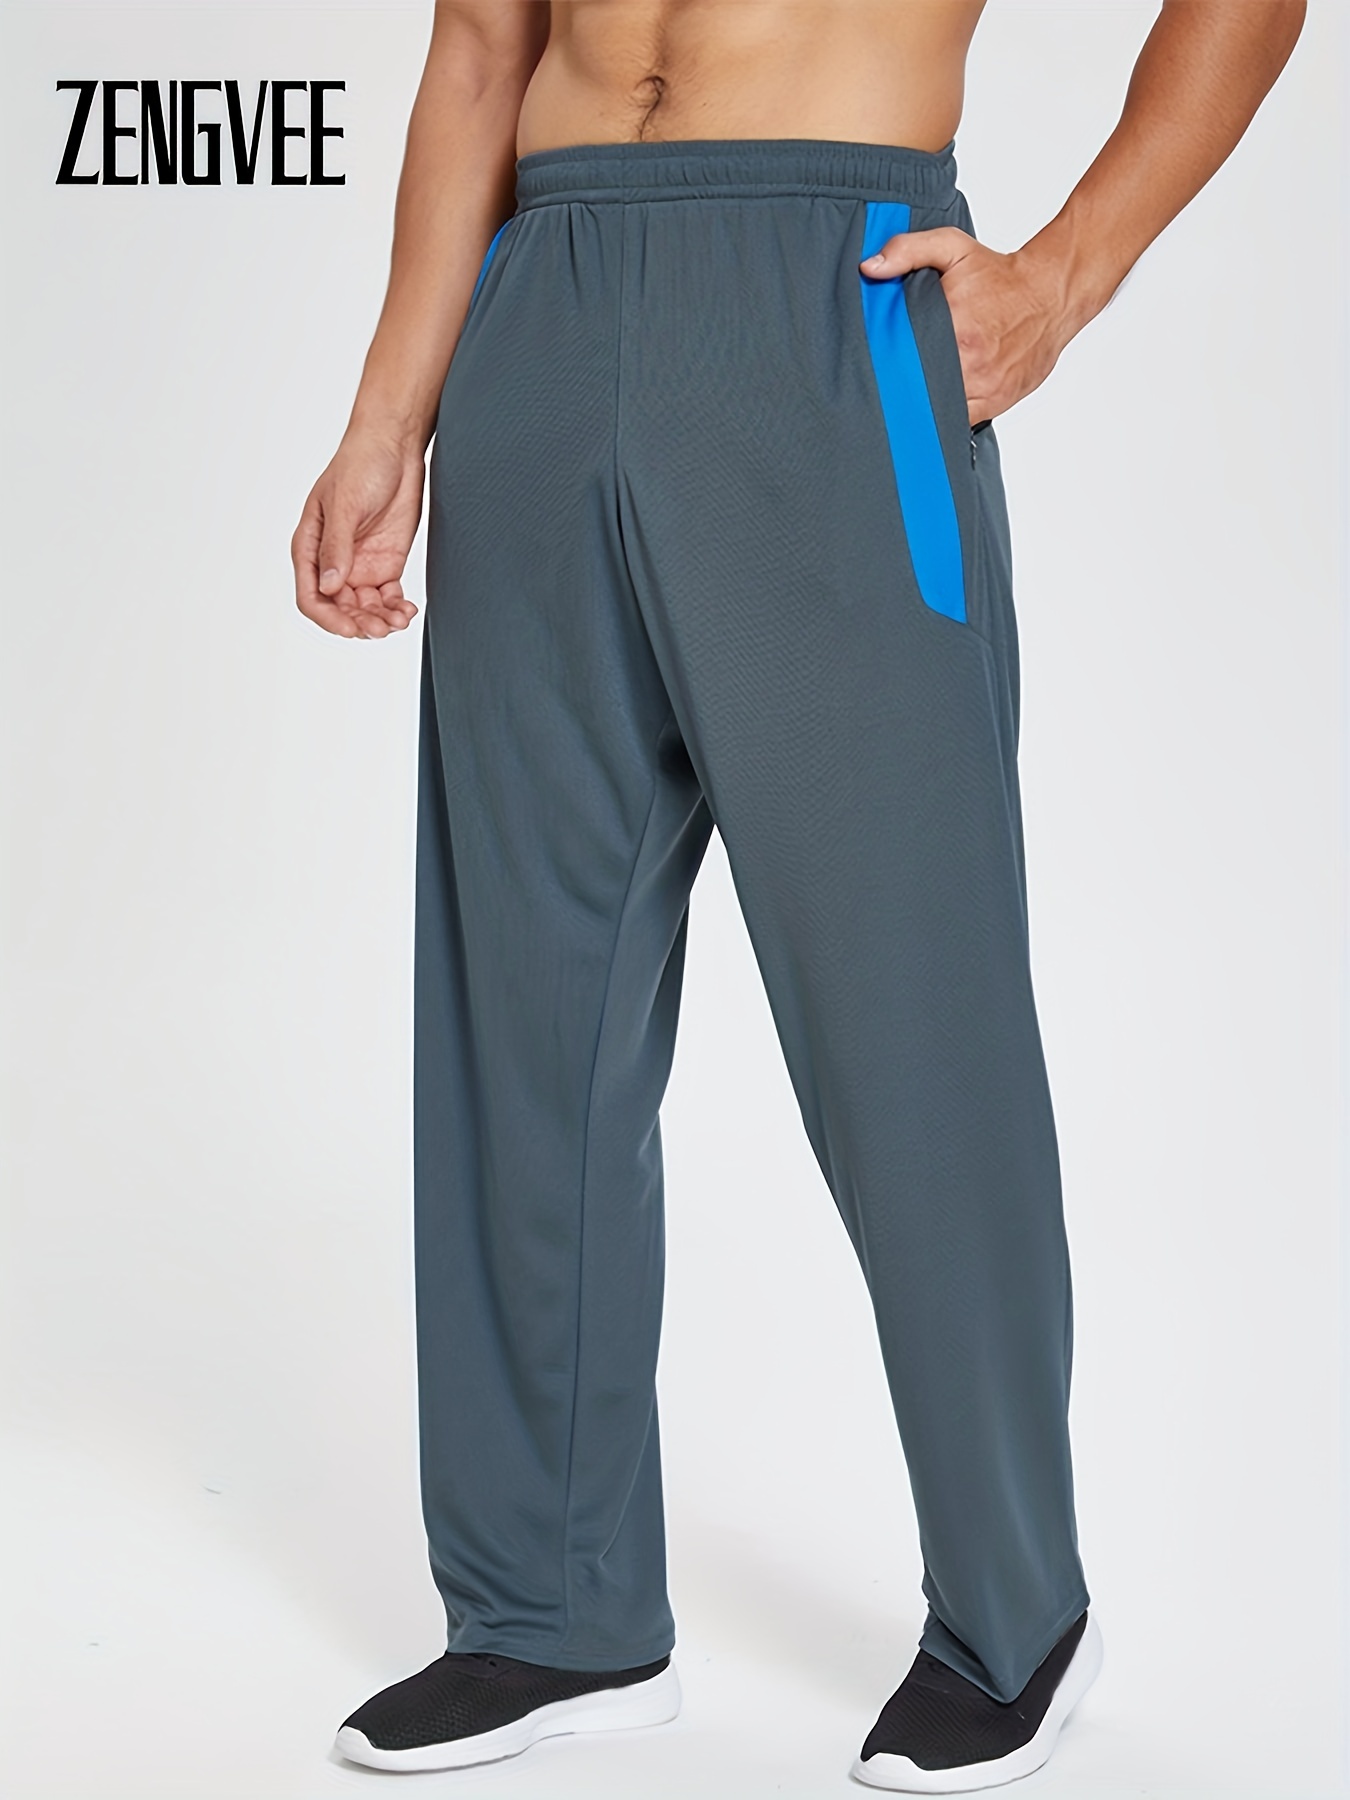 Men's Workout and Travel Joggers, Sweatpants with Pockets – Layer 8